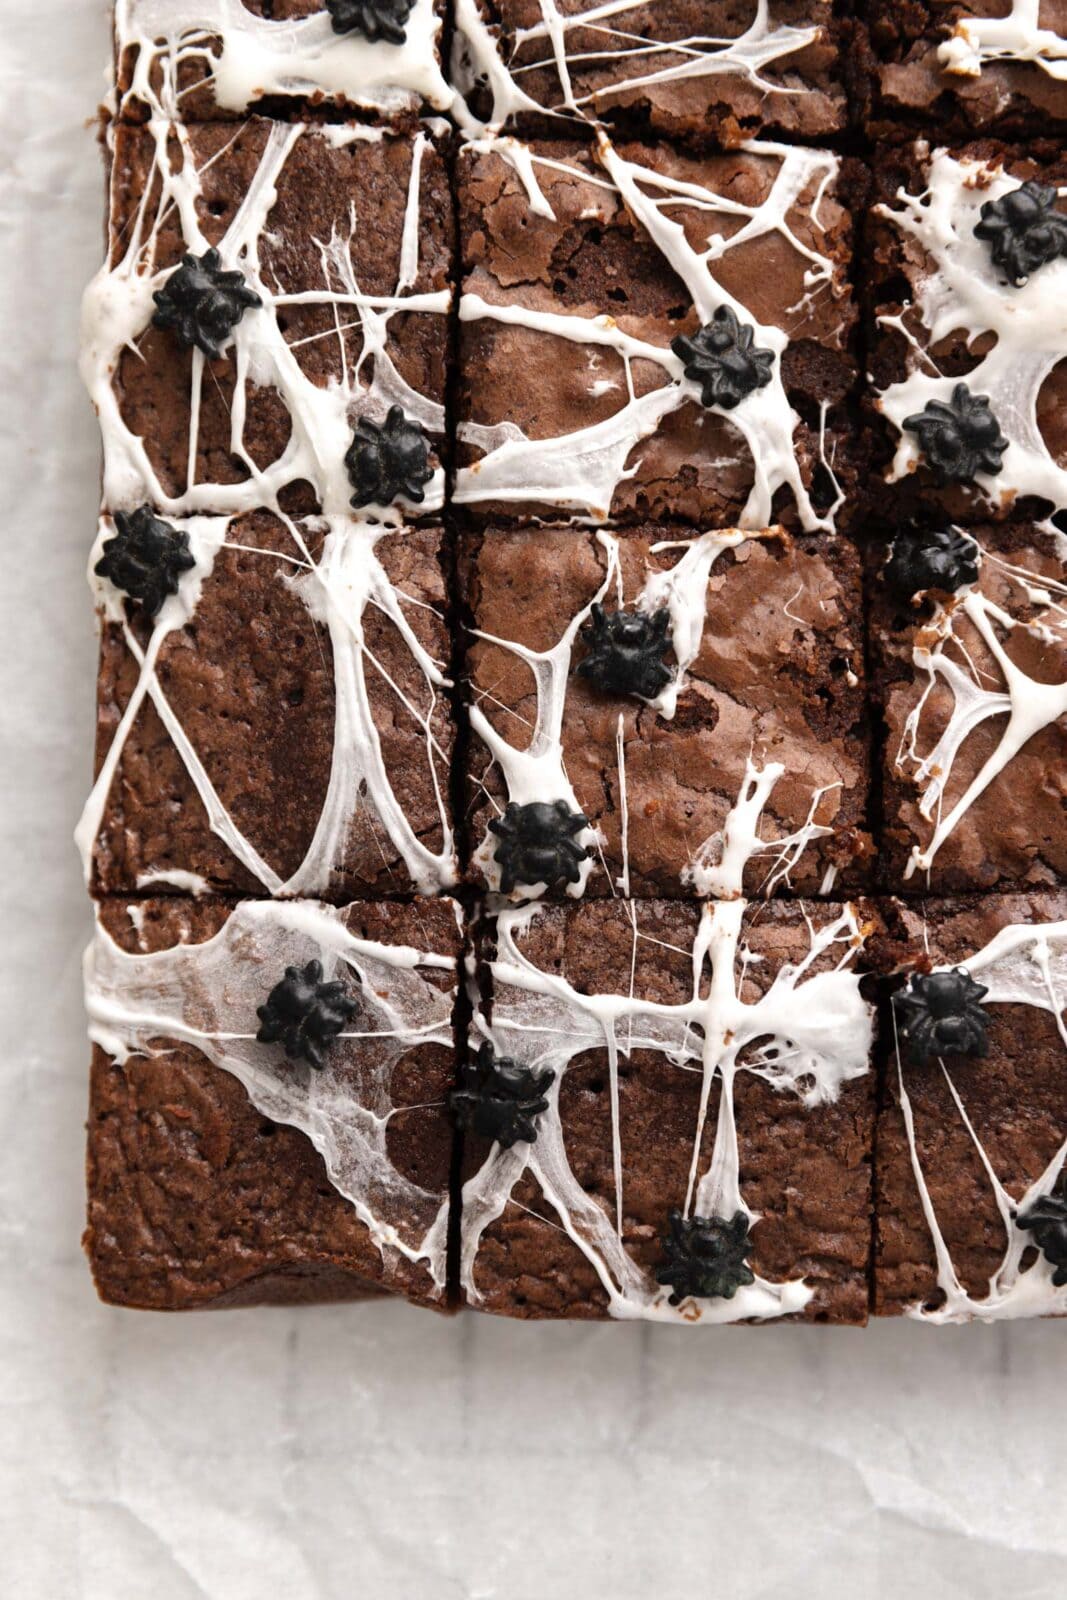 spider web marshmallow brownies